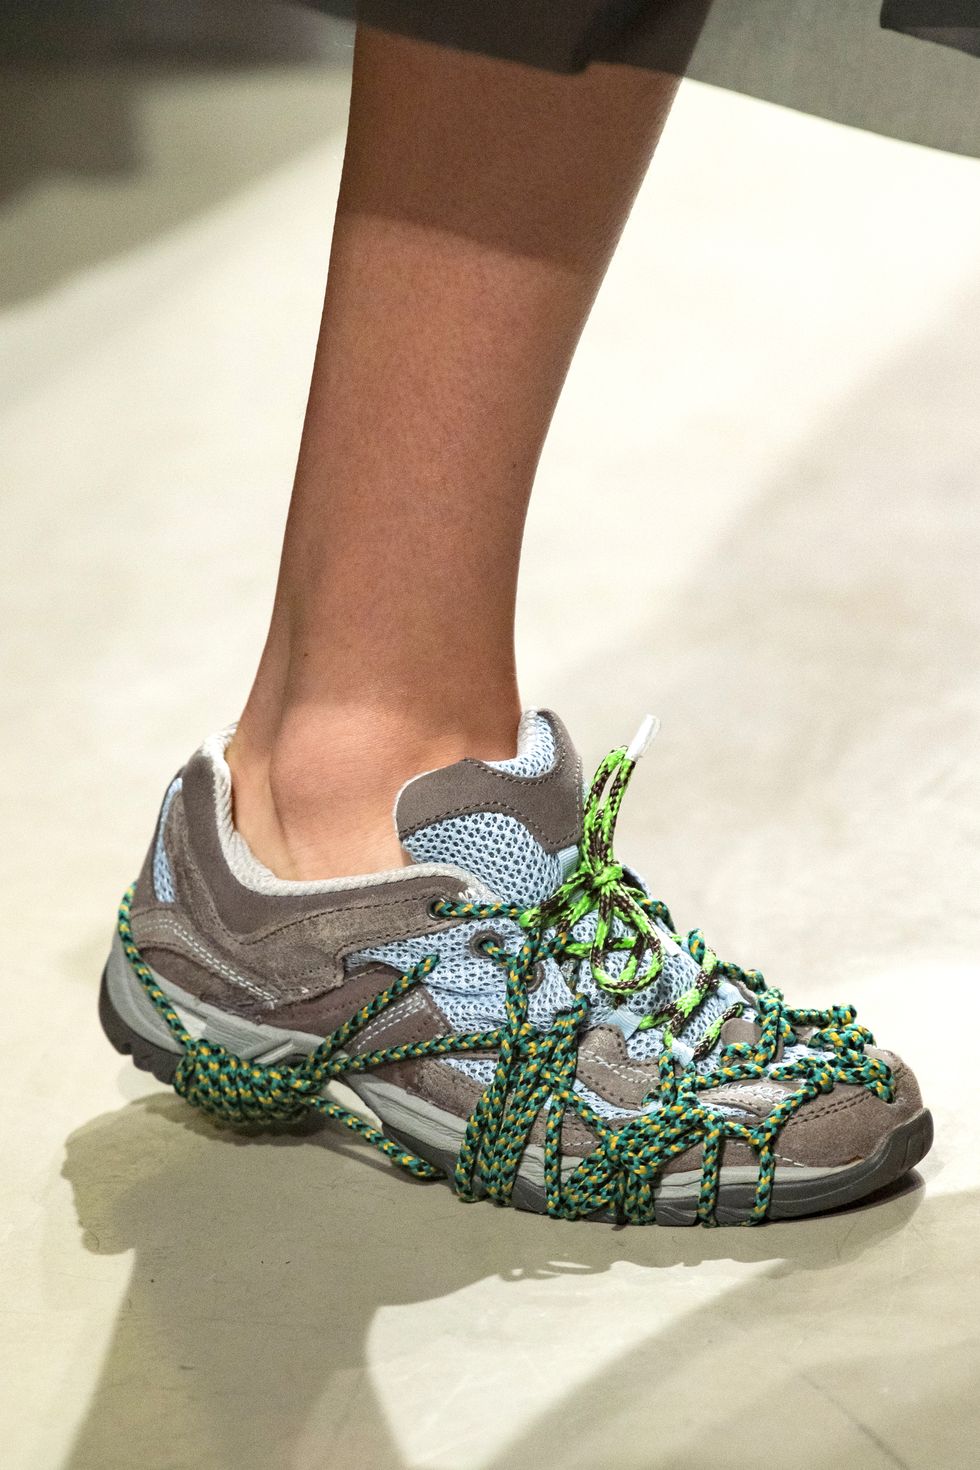 These 12 2020 Shoe Trends Are About to Be Absolutely Everywhere